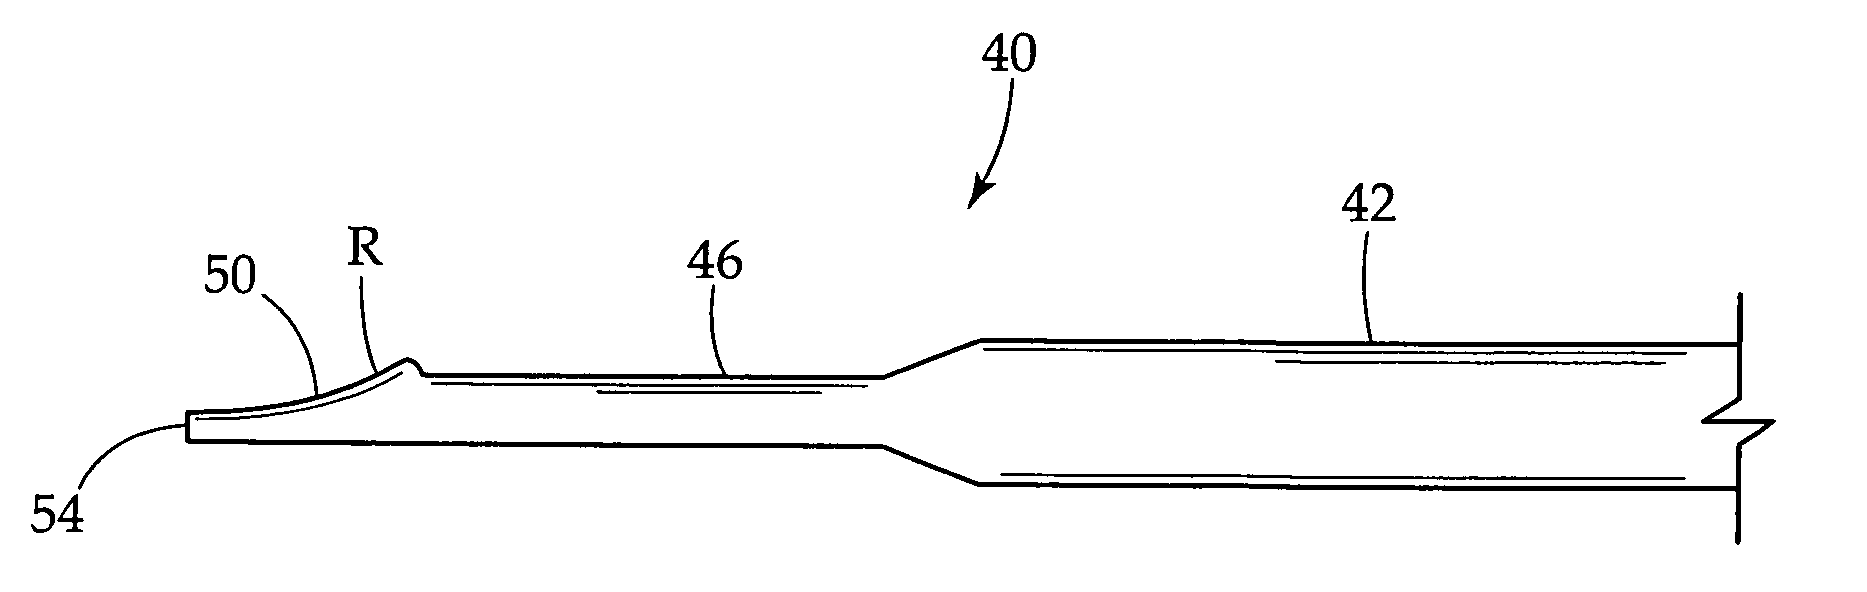 Dental tool for the fitting, installation and replacement of a dental prosthetic attachment